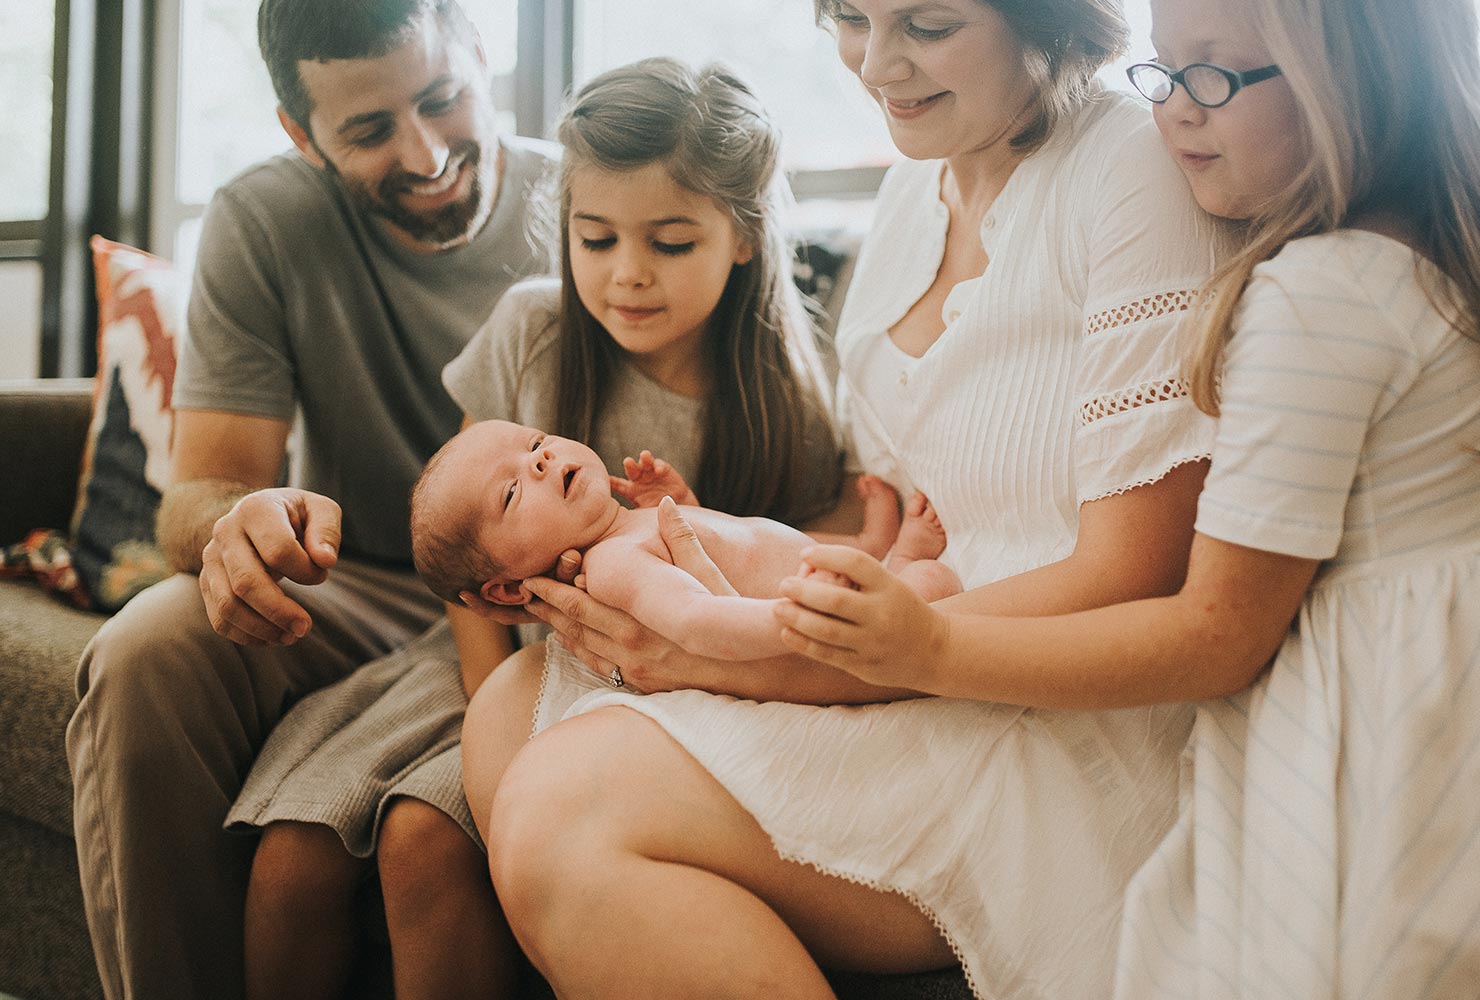 sibling photo ideas family with newborn